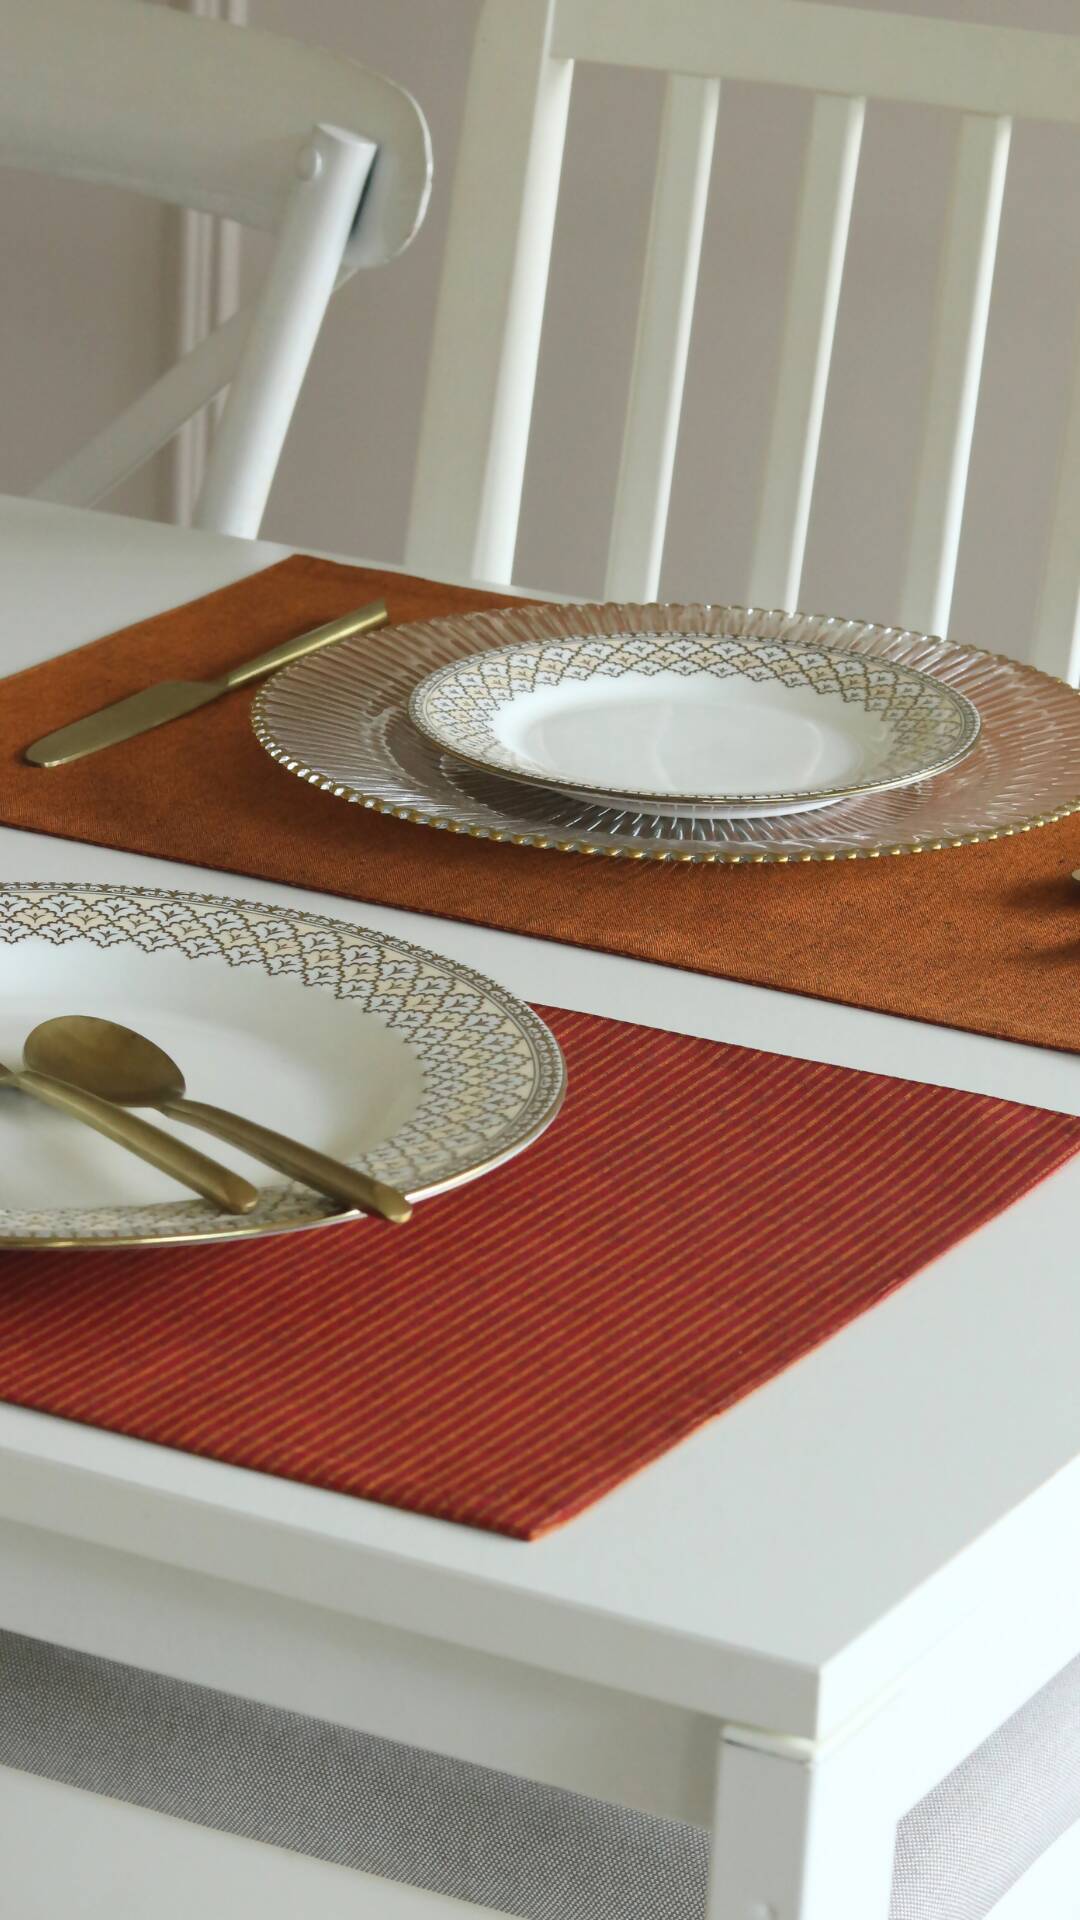 Serene Sunset Reversible & Wipeable Cotton Placemats